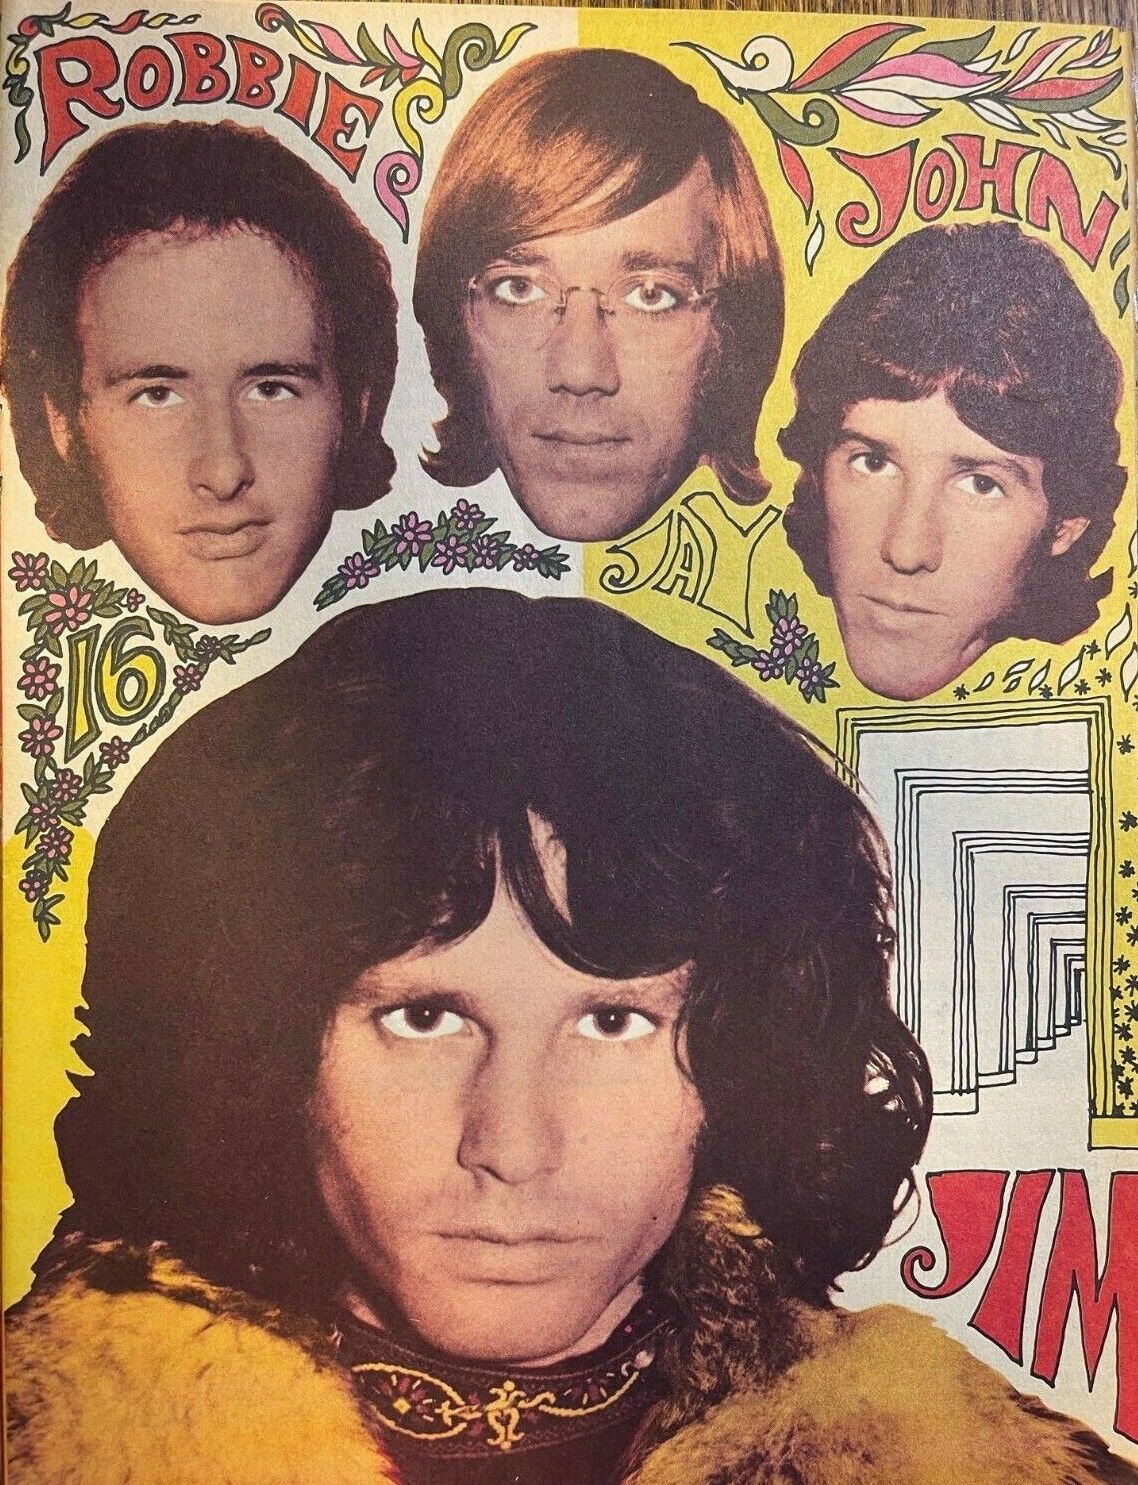 1967 Jim Morrison and The Doors